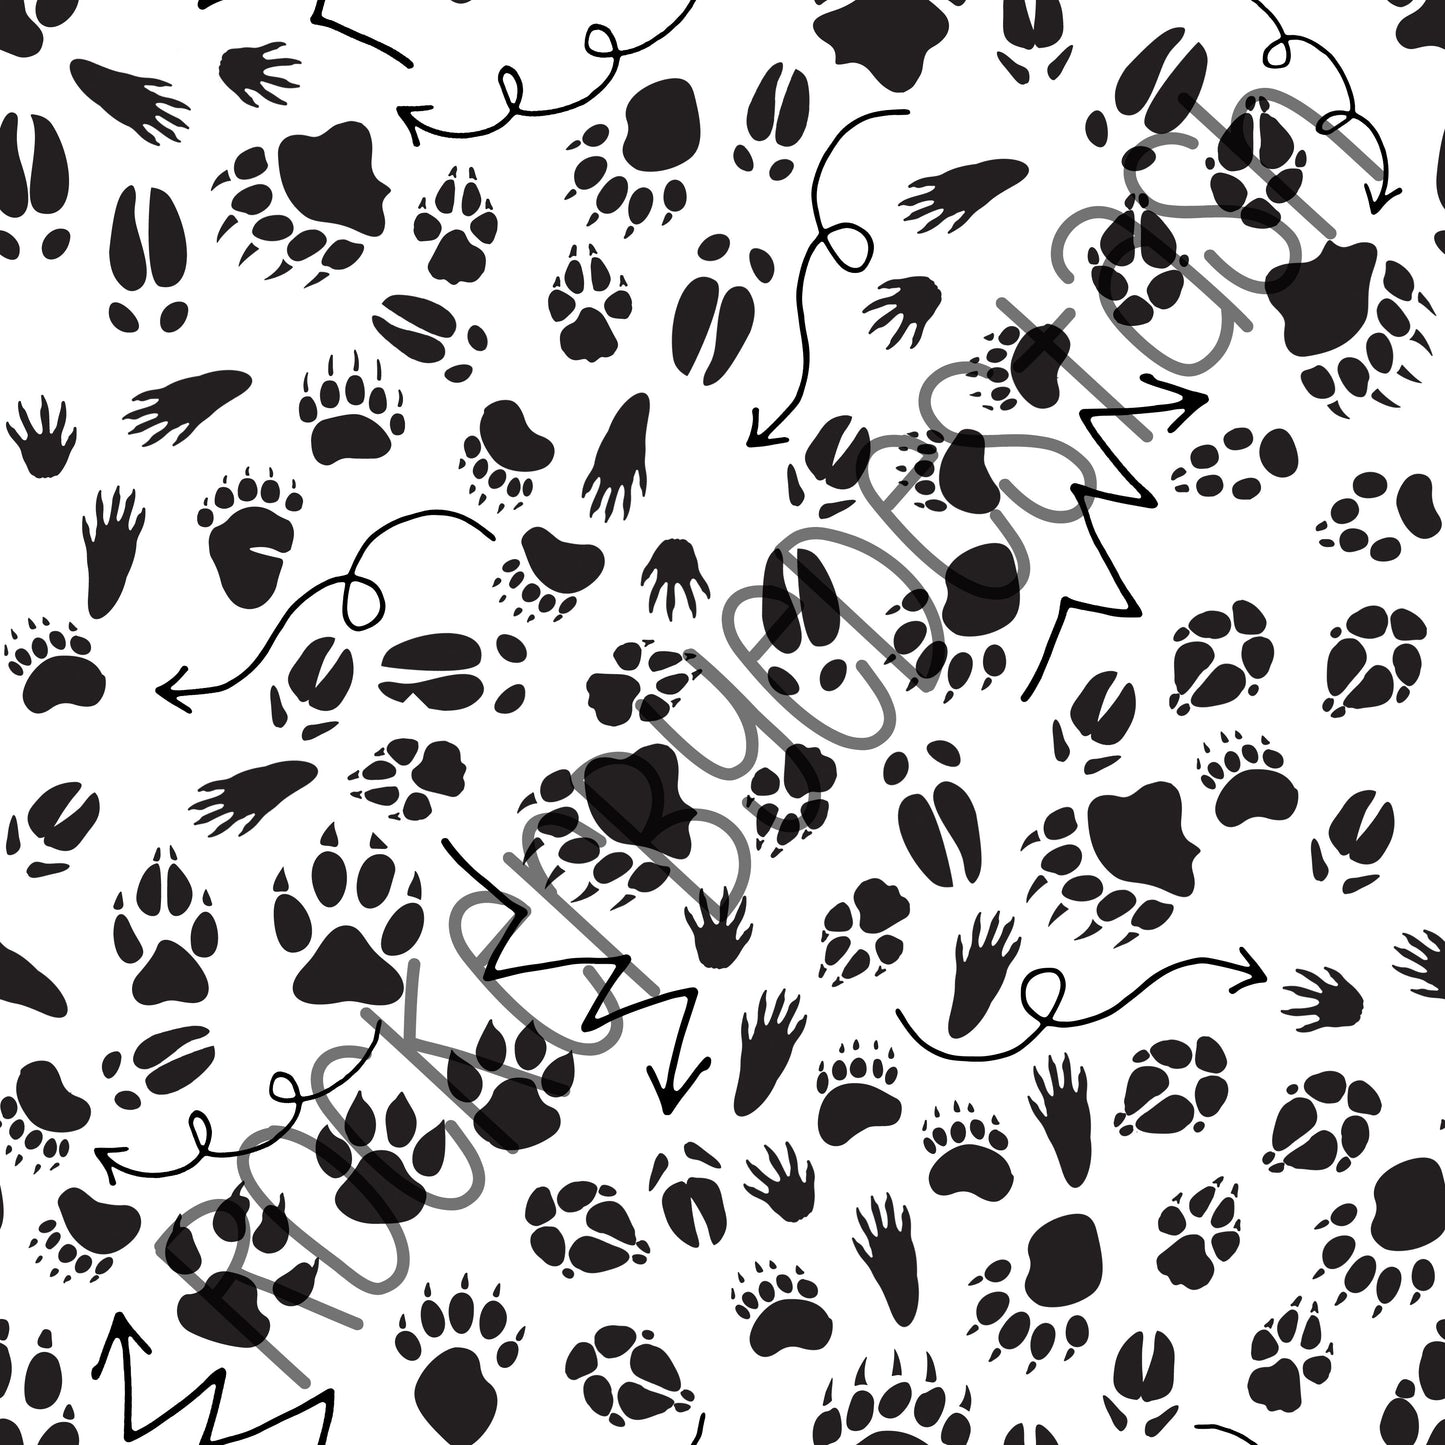 French Terry ACCENT prints - Retail -  1 yard per quantity Coordinate designs Black and white